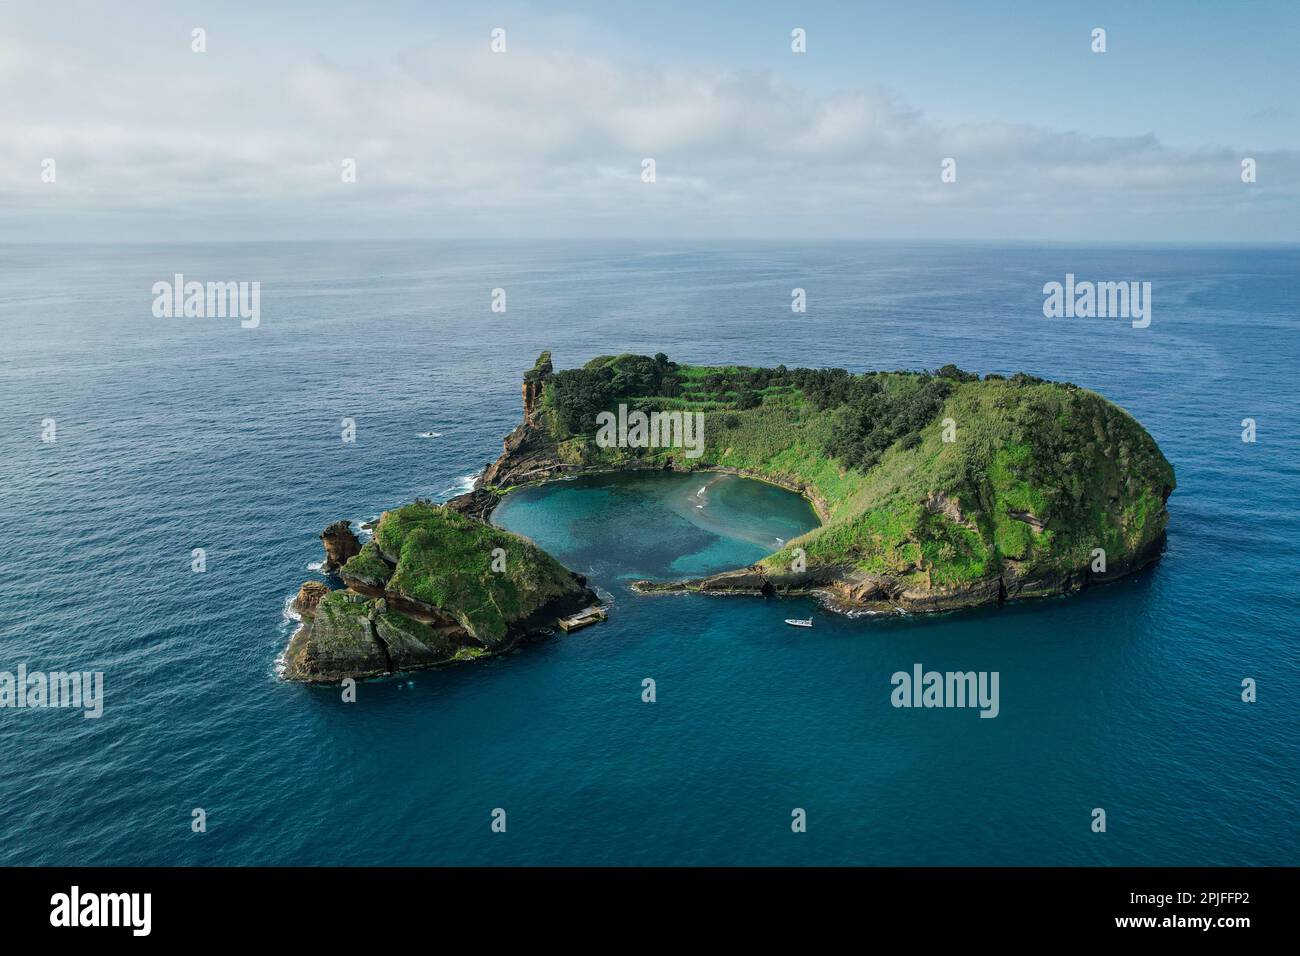 Vila Franca Islet, also known as the Princess Ring is a vegetated uninhabited islet located off the south central coast of the island of Sao Miguel in Stock Photo